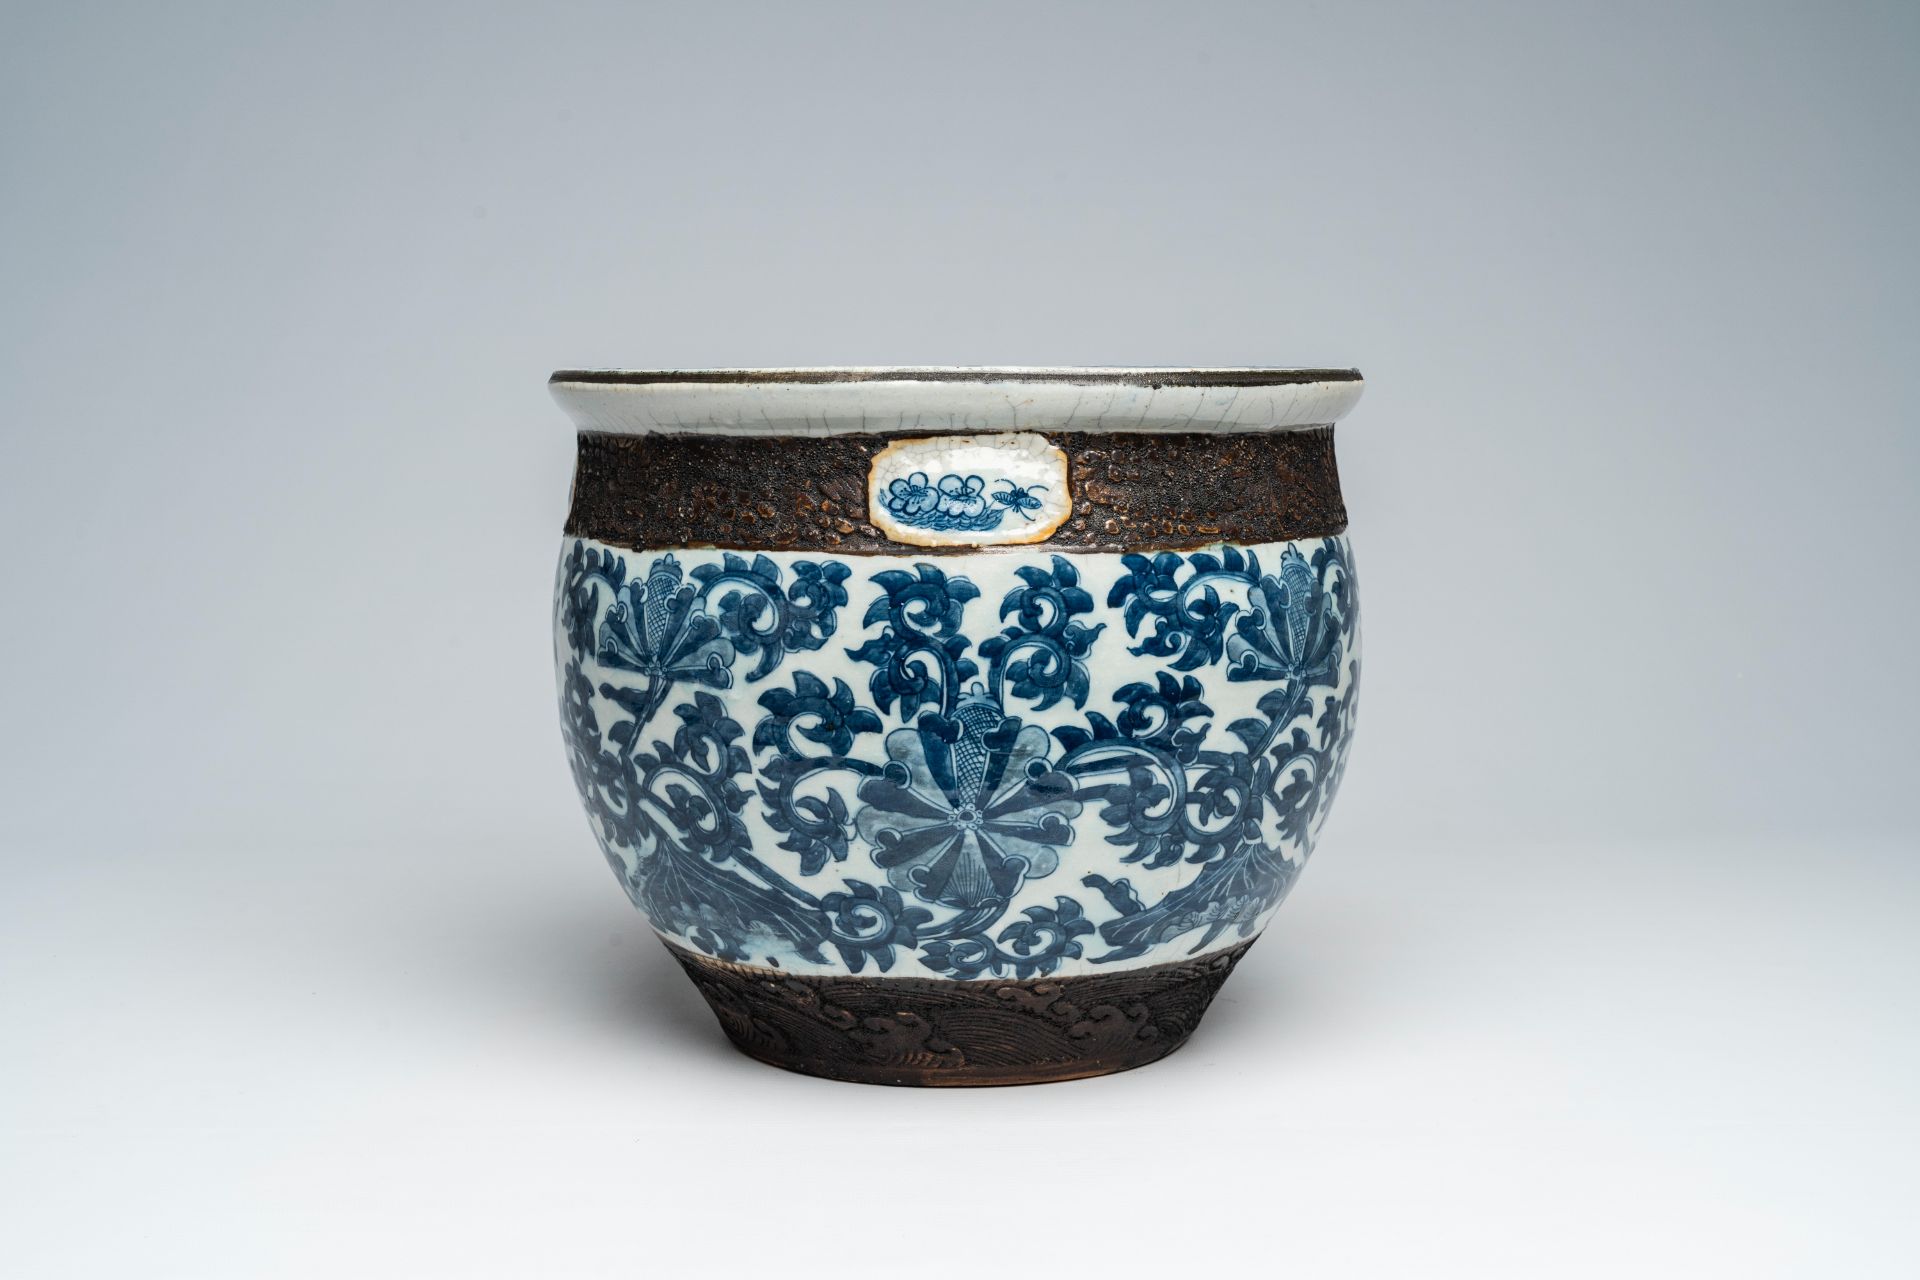 A Chinese Nanking craquelÃ© blue and white jardiniÃ¨re with floral design, 19th C. - Image 5 of 7